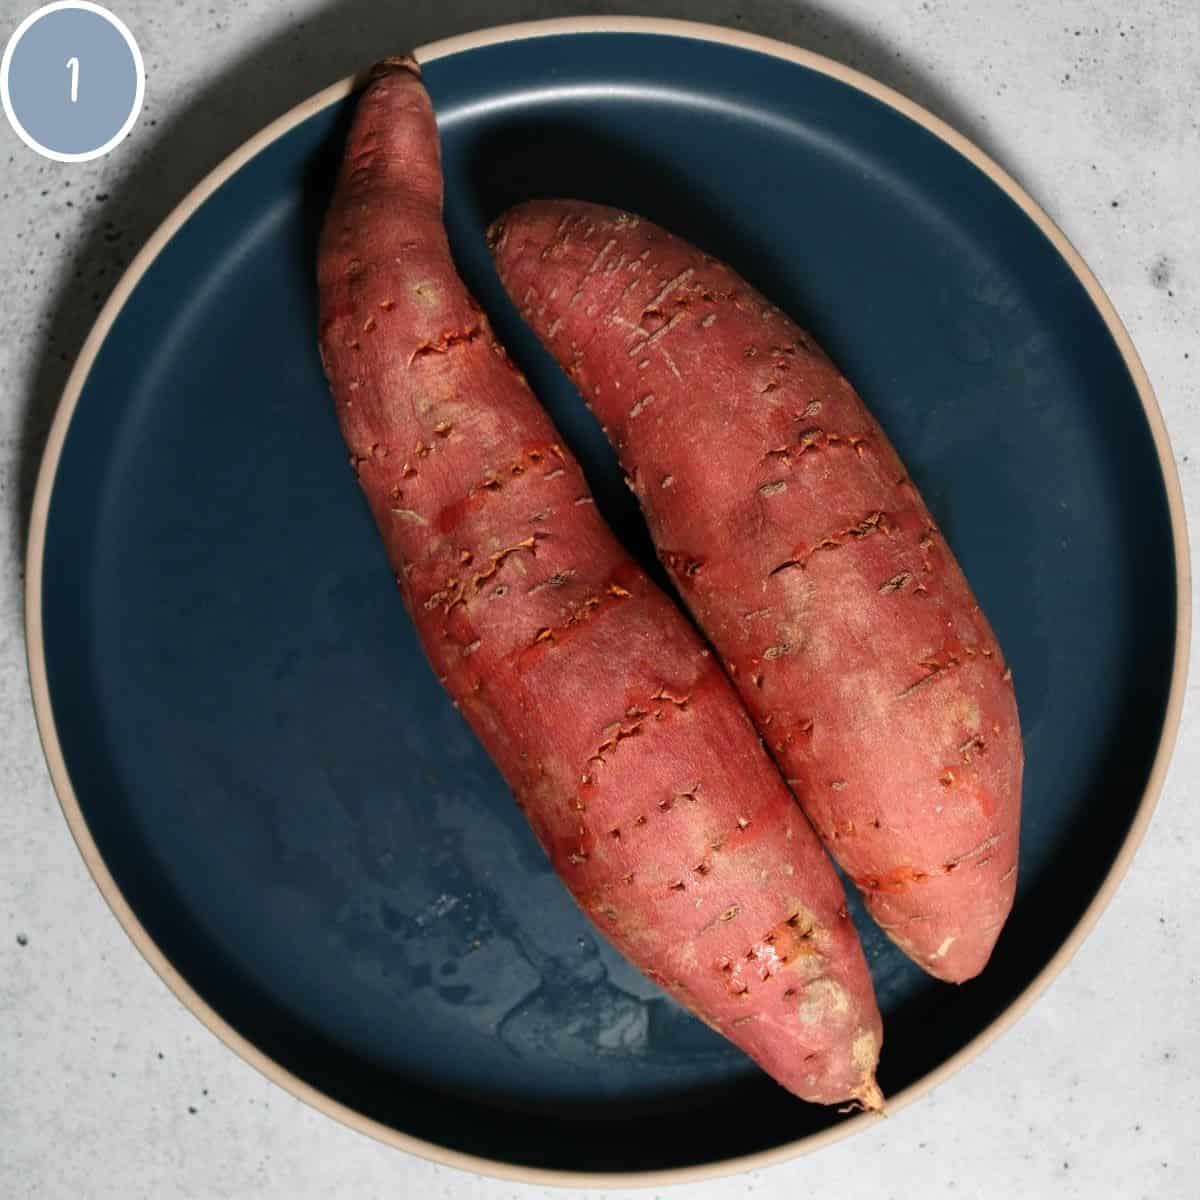 Sweet potatoes pricked with a fork and microwaved.